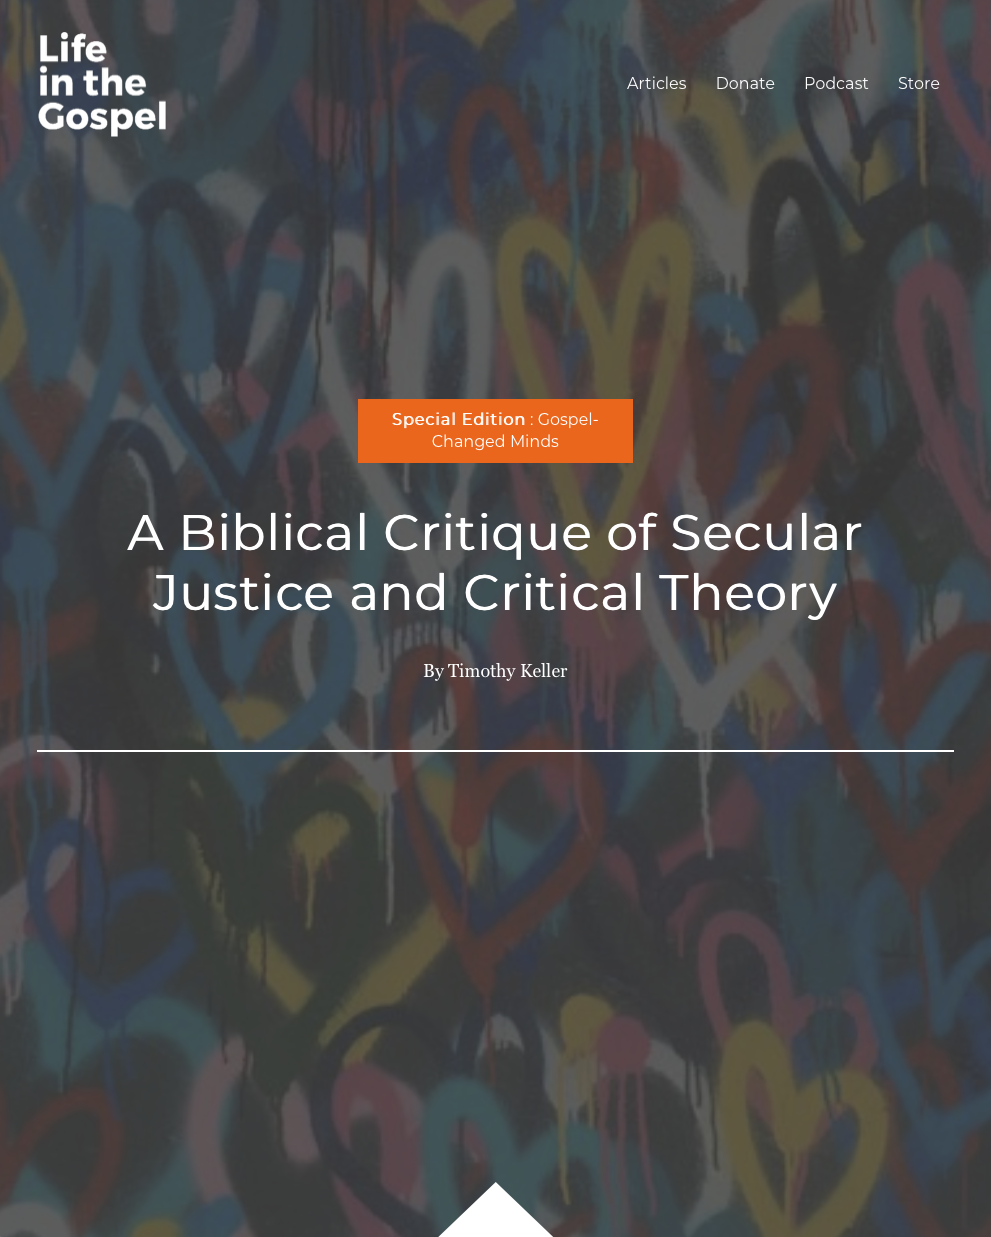 A Biblical Critique of Secular Justice and Critical Theory by Timothy Keller